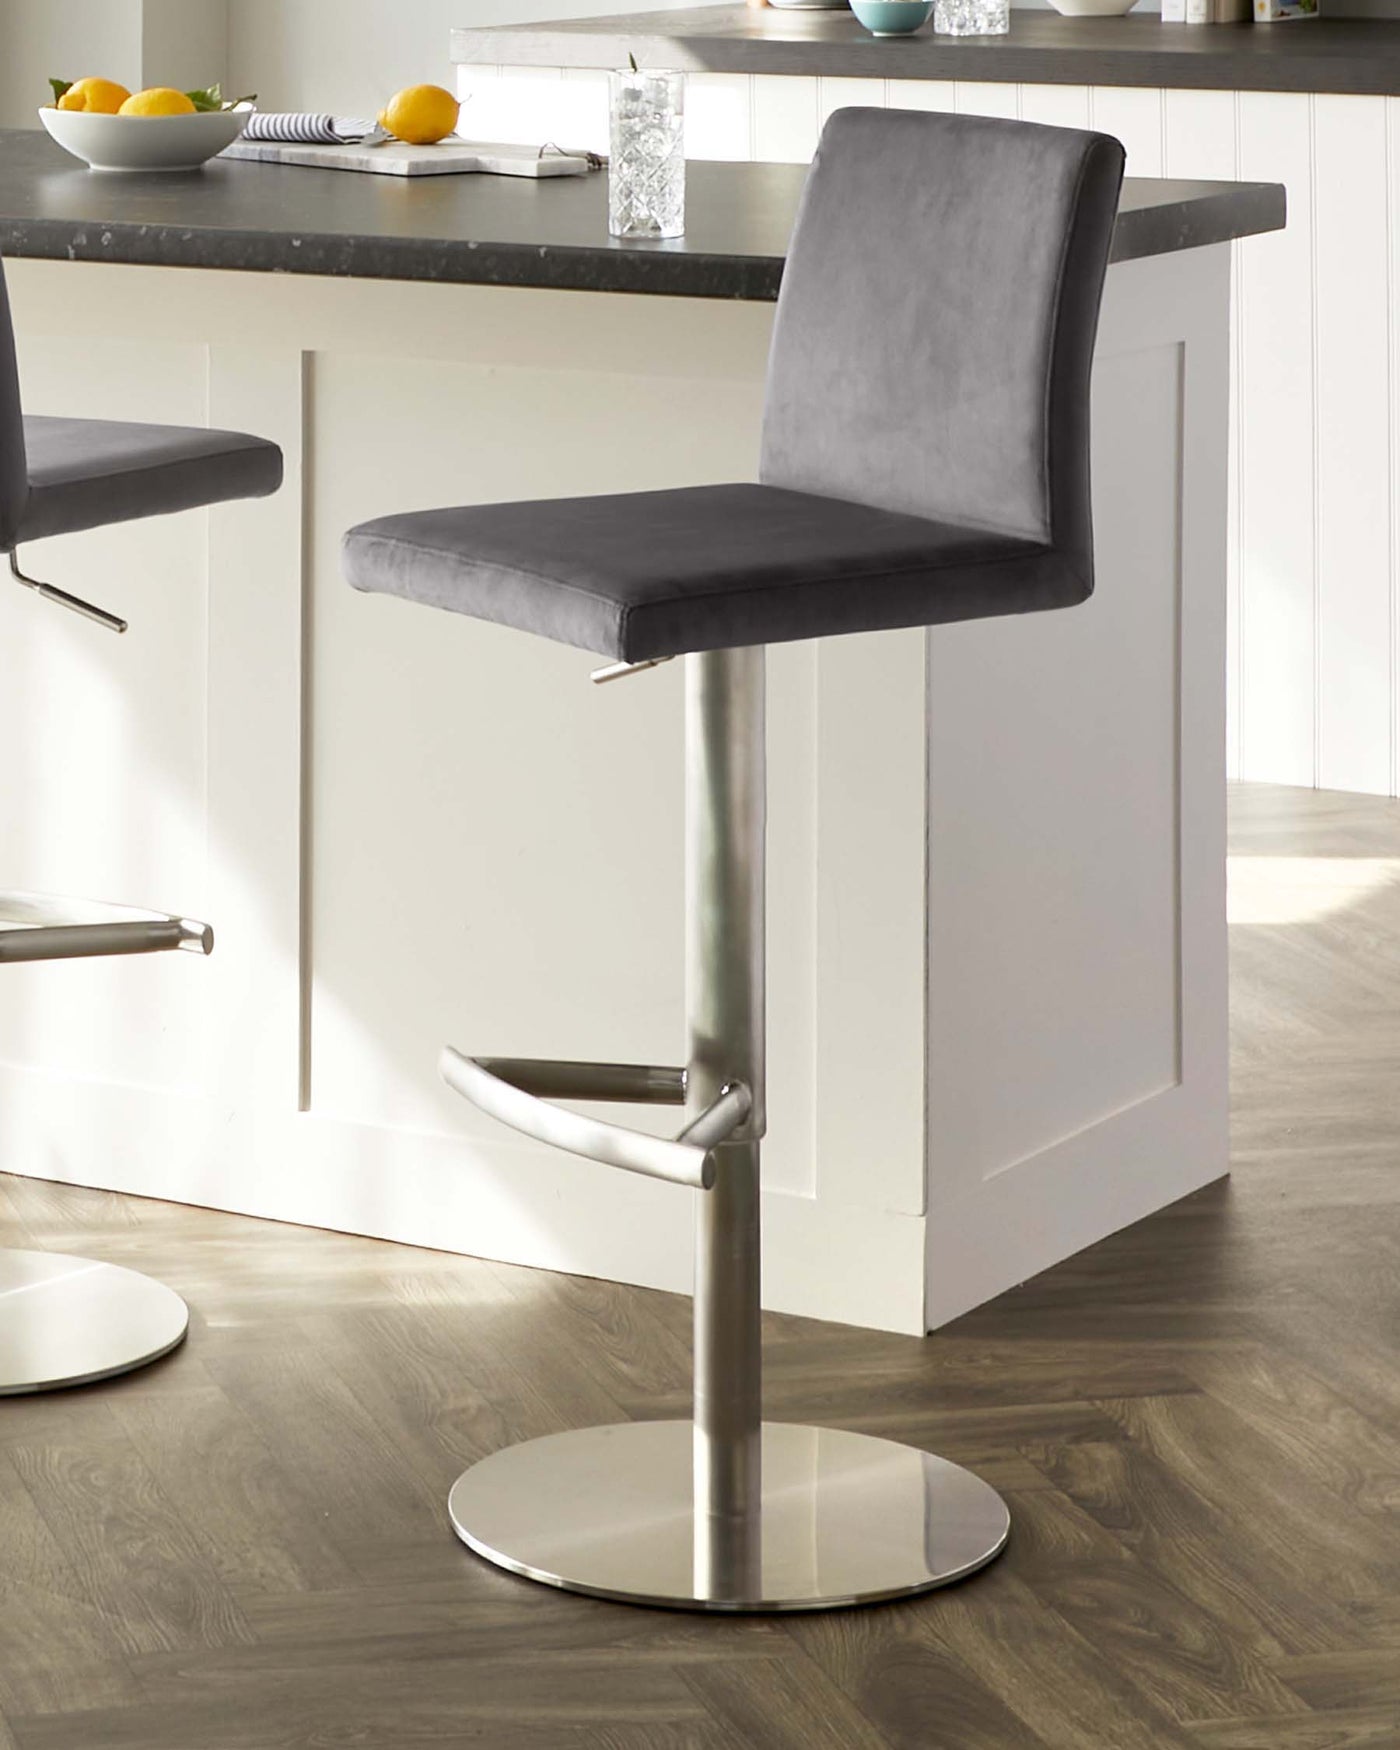 Modern adjustable bar stool with a sleek chrome pedestal base, featuring an integrated footrest. The seat and backrest are upholstered in a grey faux leather with a subtle horizontal stitching, providing a contemporary look suitable for a variety of kitchen interiors.